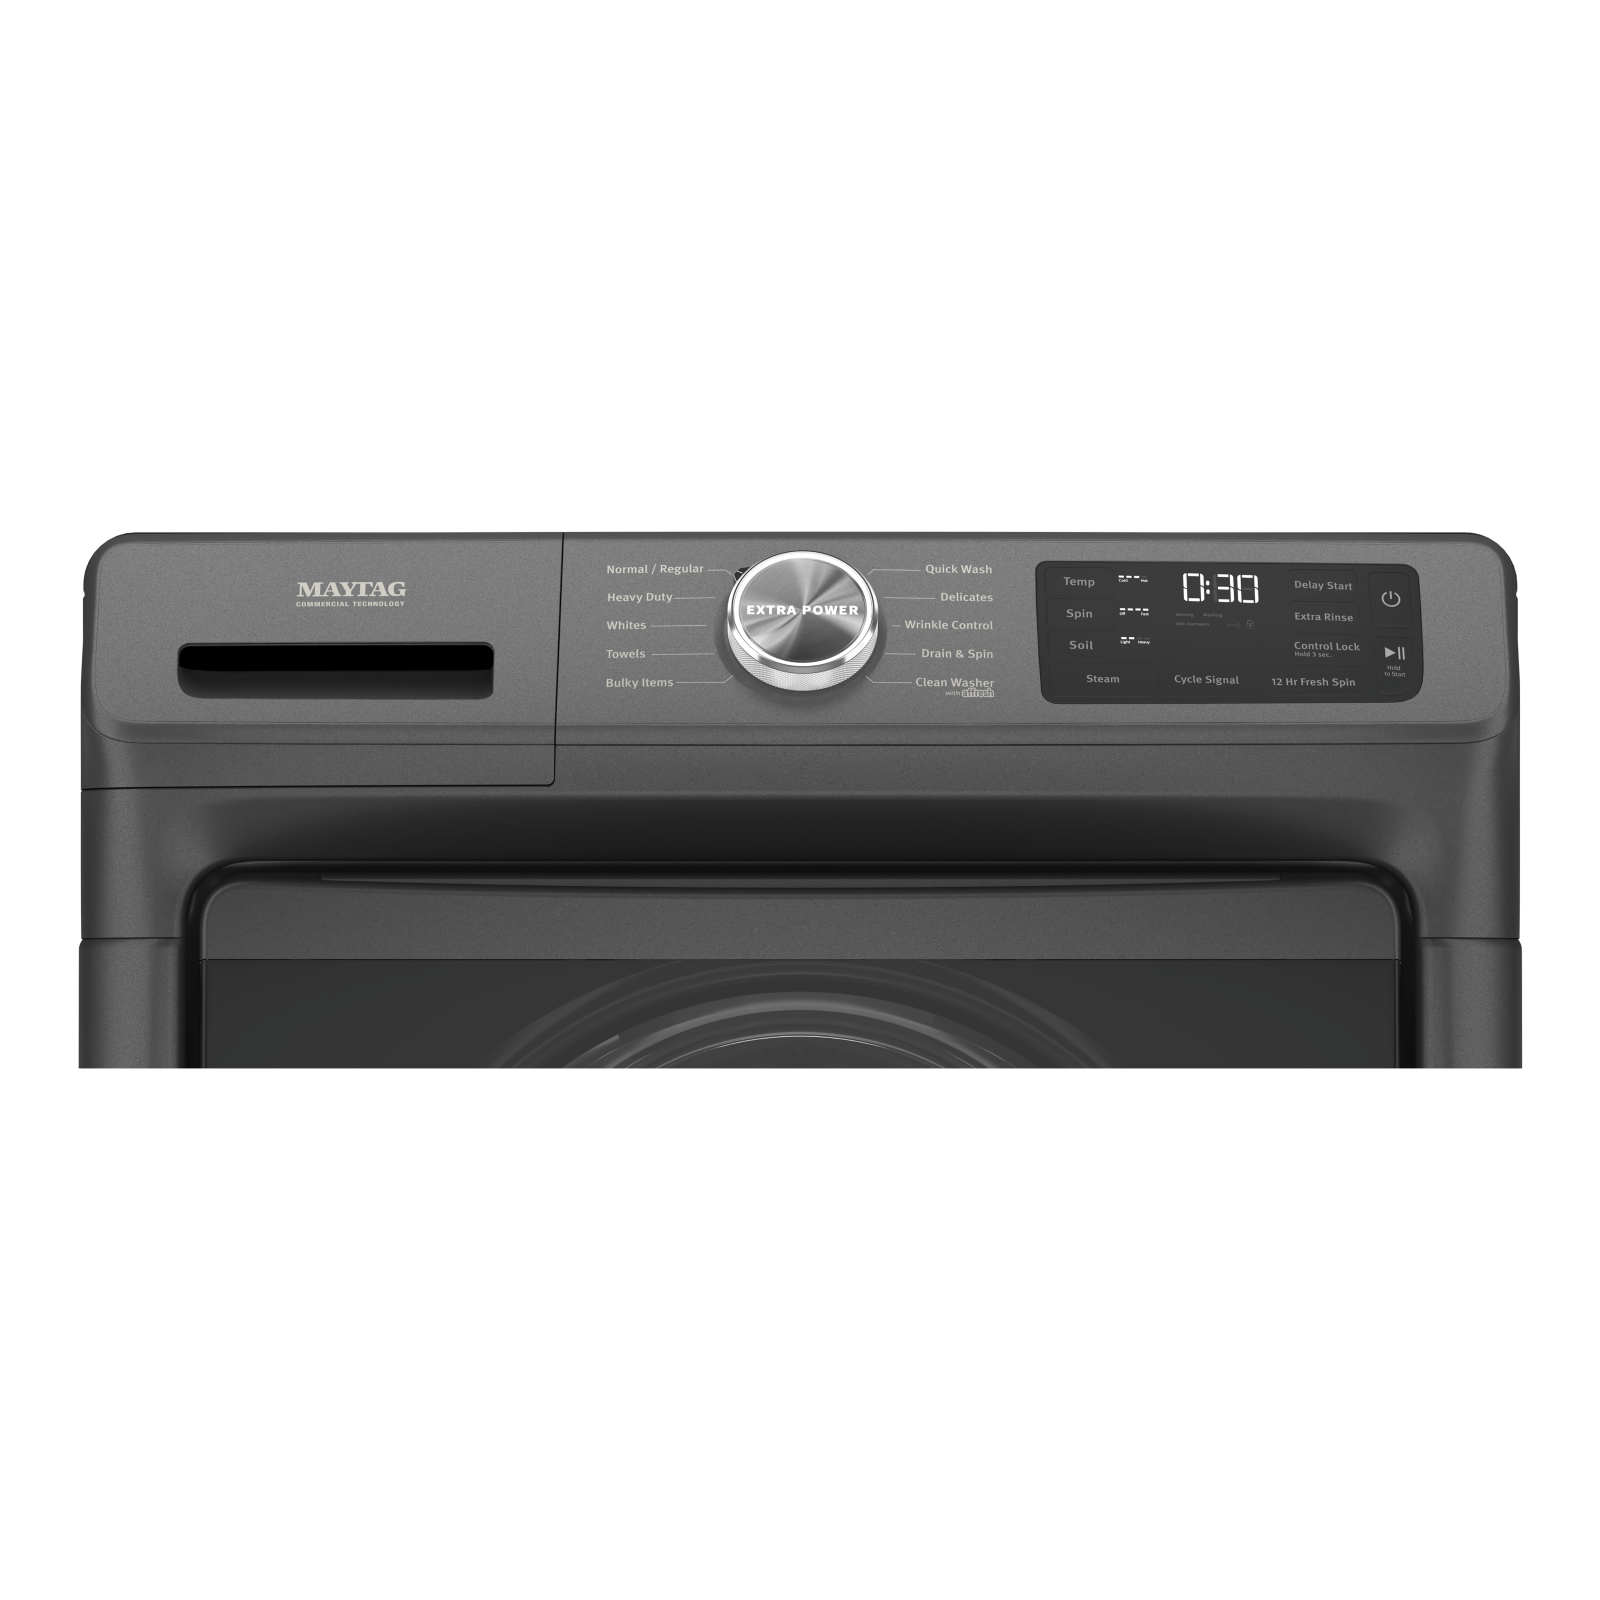 Maytag - 5.2 cu. Ft  Front Load Washer in Black - MHW5630MBK